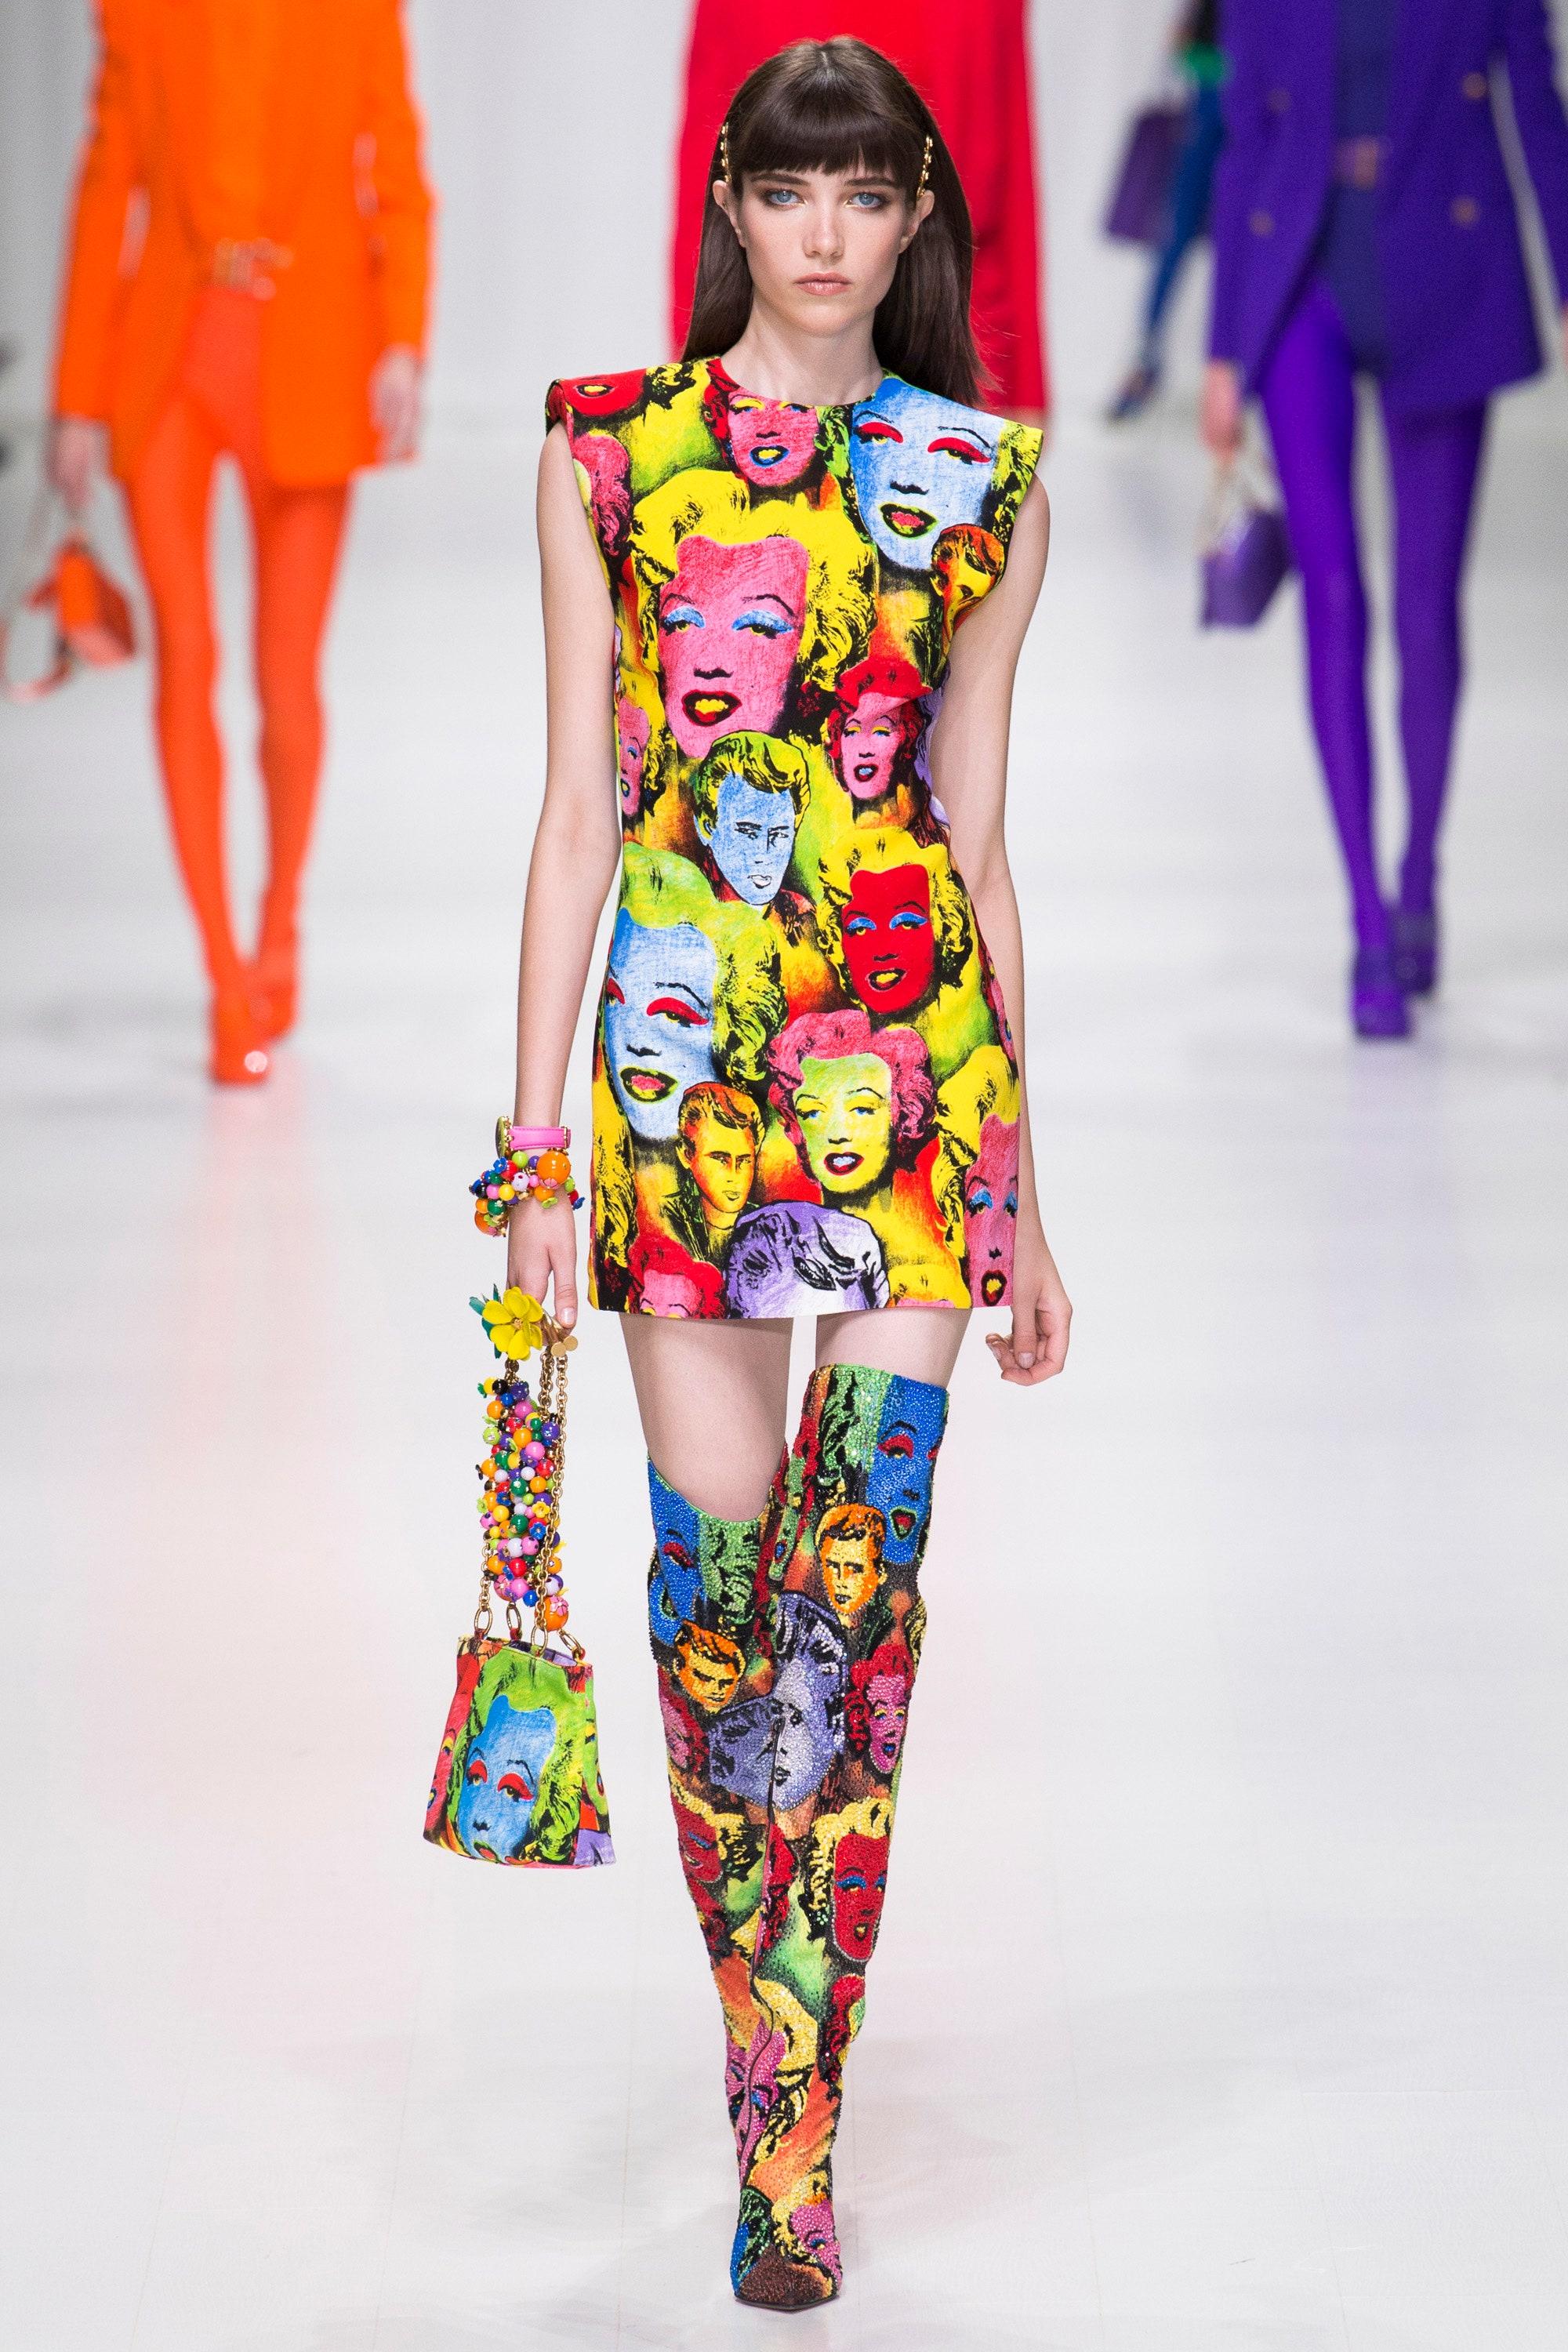 VERSACE
SS18 Look # 53 Tribute 1990 Marilyn Monroe James Dean pop art knee boots EU39 - 9
Model Name / Style: Pop art boot
Material: Fabric; leather lining
Color: Multicolour
Pattern: Abstract; pop art print
Closure: Zip
Lining material: